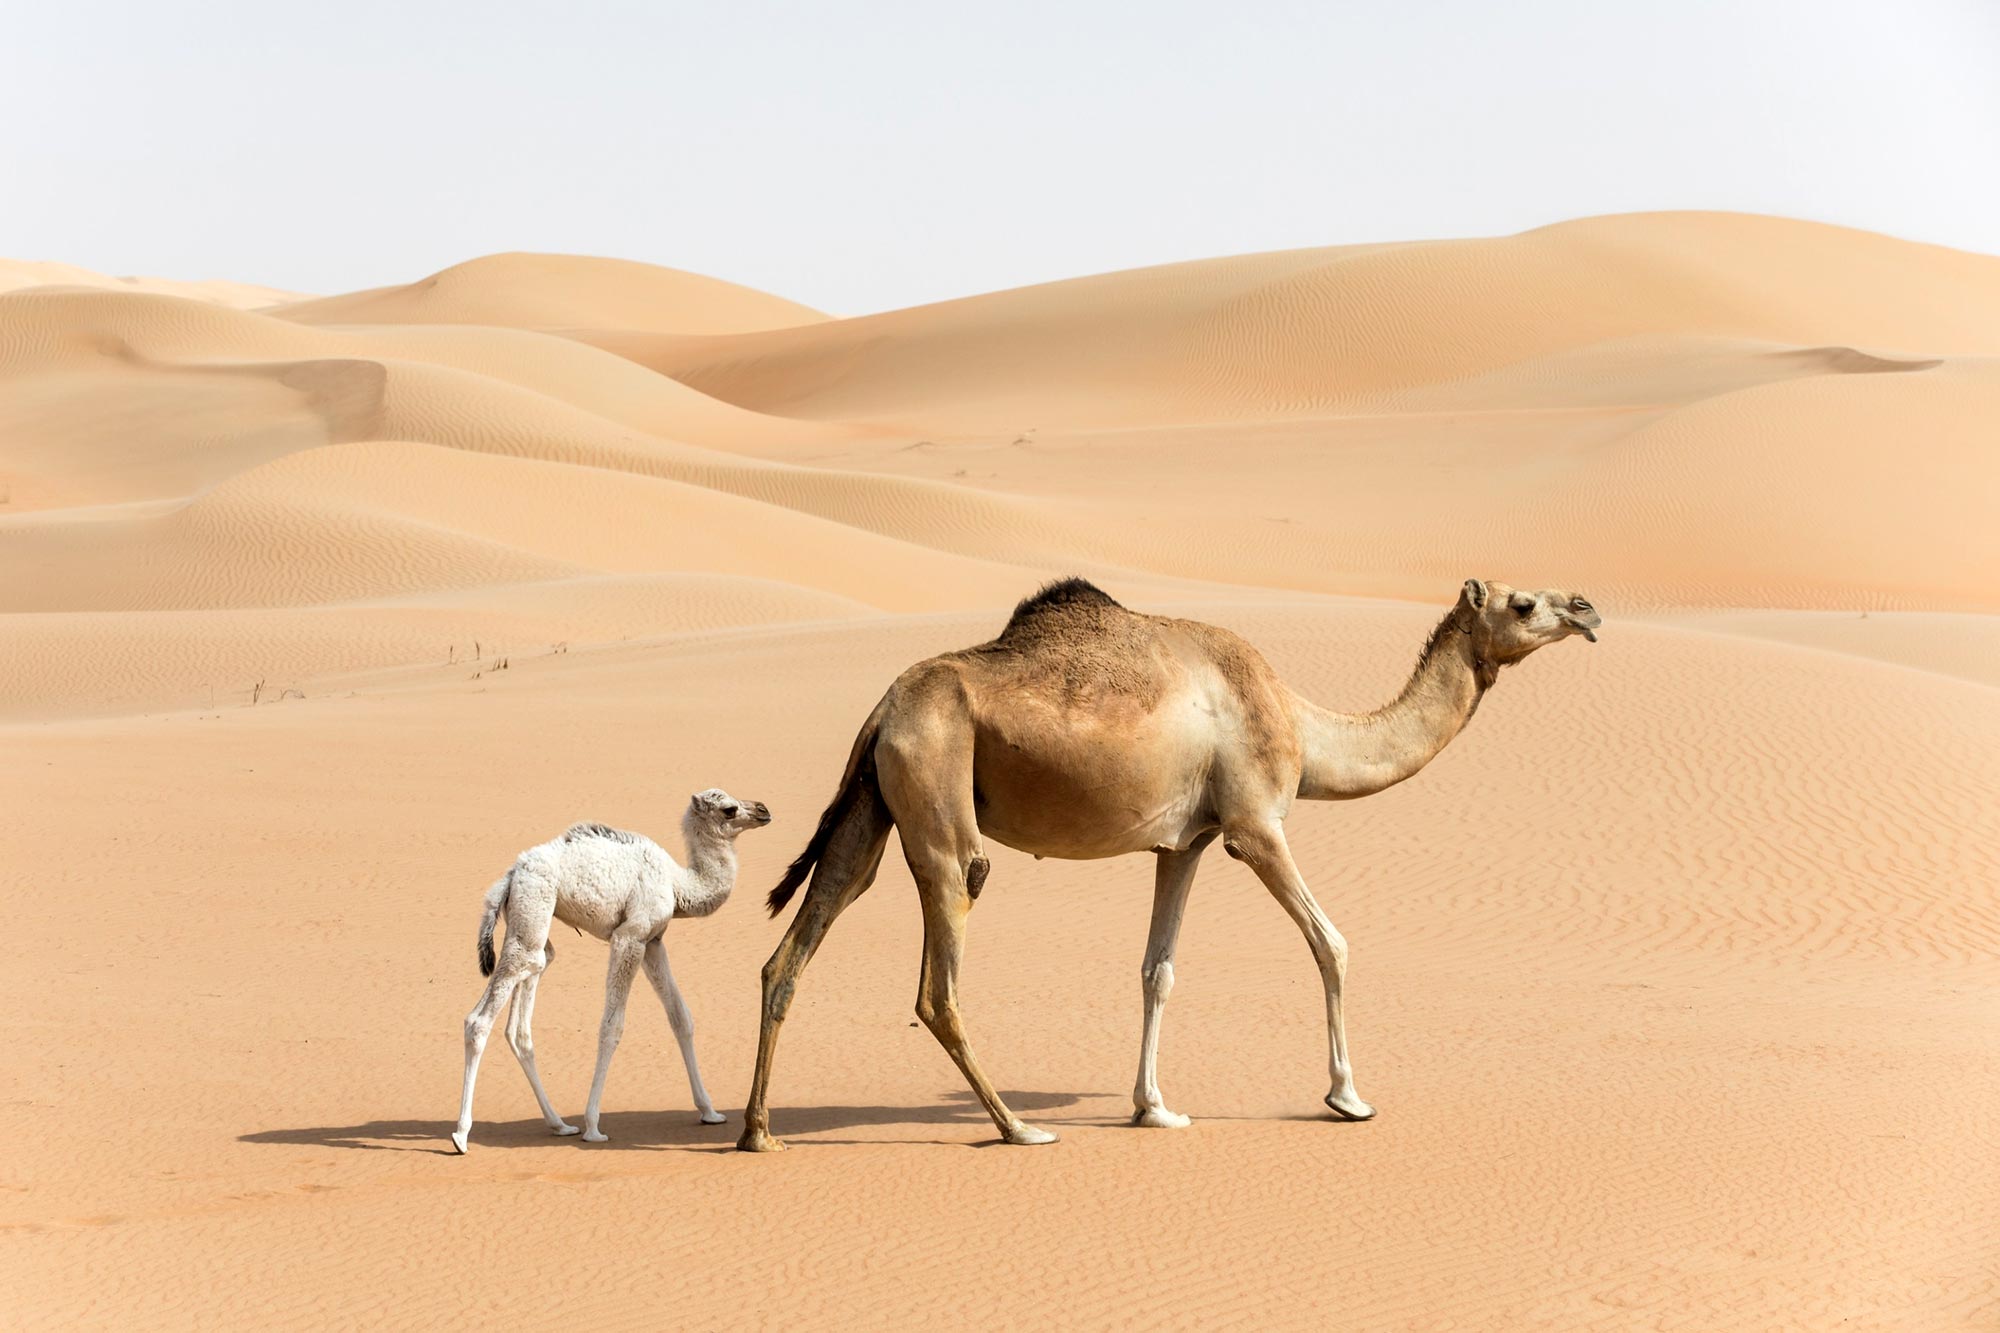 Coping With Extremes: How the One-Humped Arabian Camel Survives Without Dri...